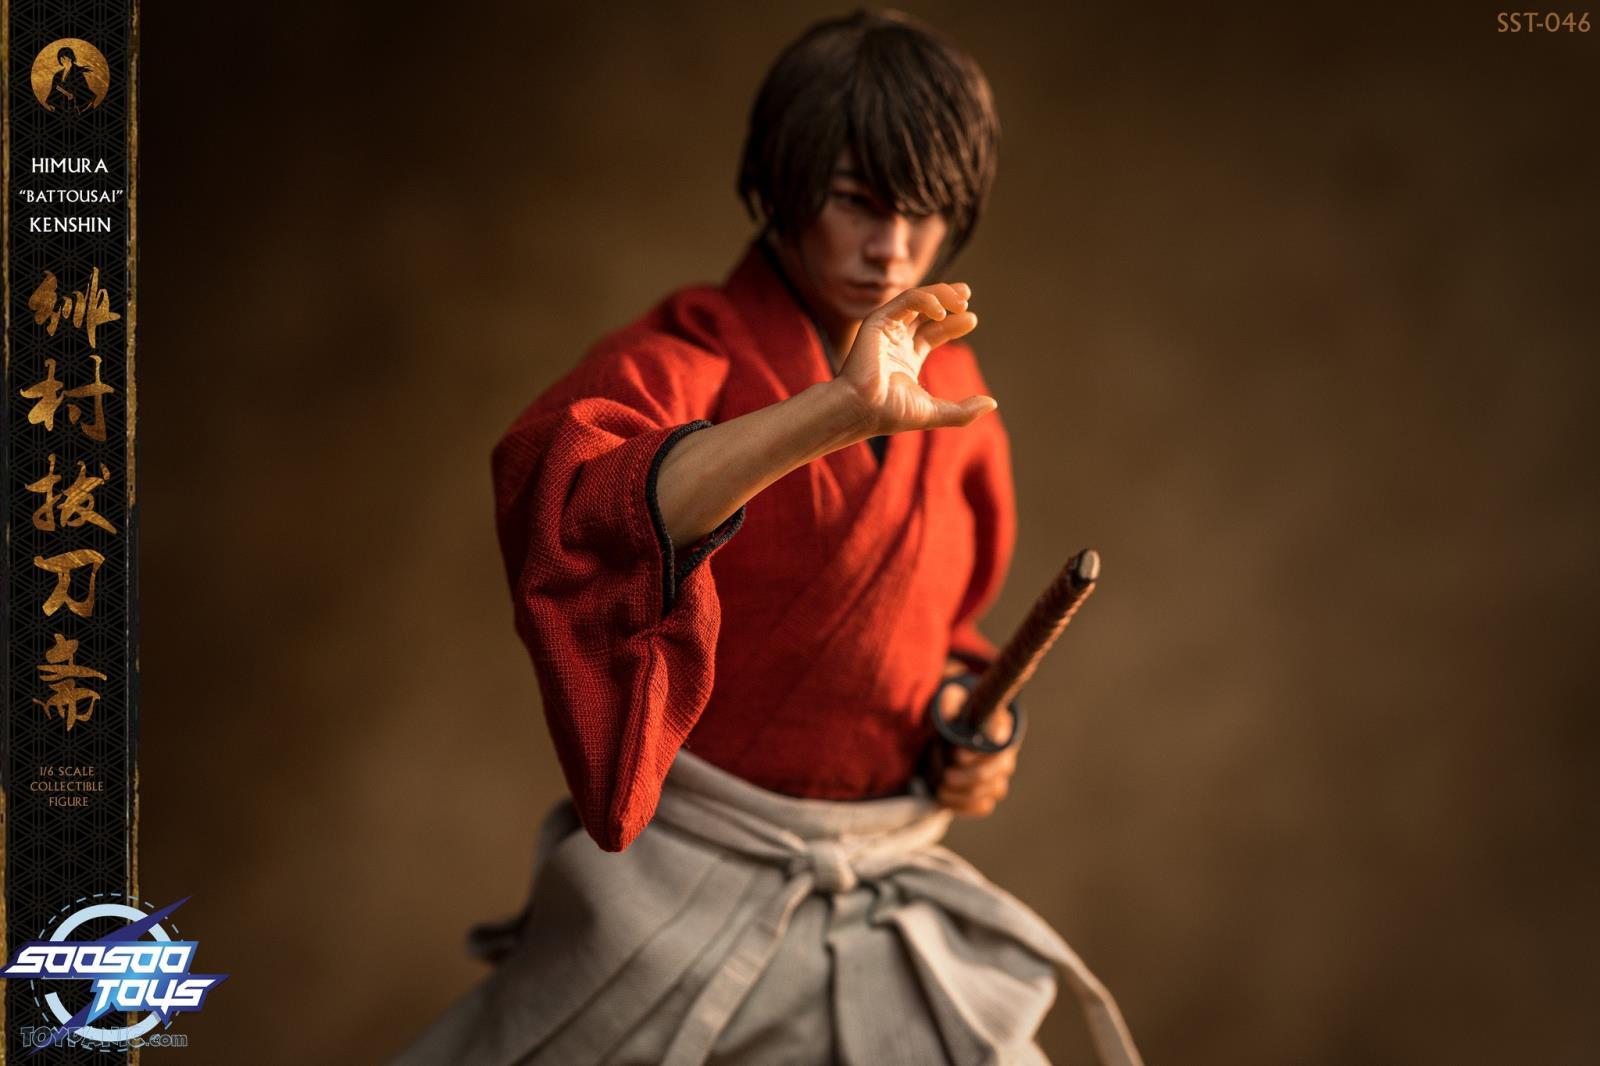 kenshin - NEW PRODUCT: 1/6 scale Rurouni Kenshin Collectible Figure from SooSooToys 712202251230PM_5762173